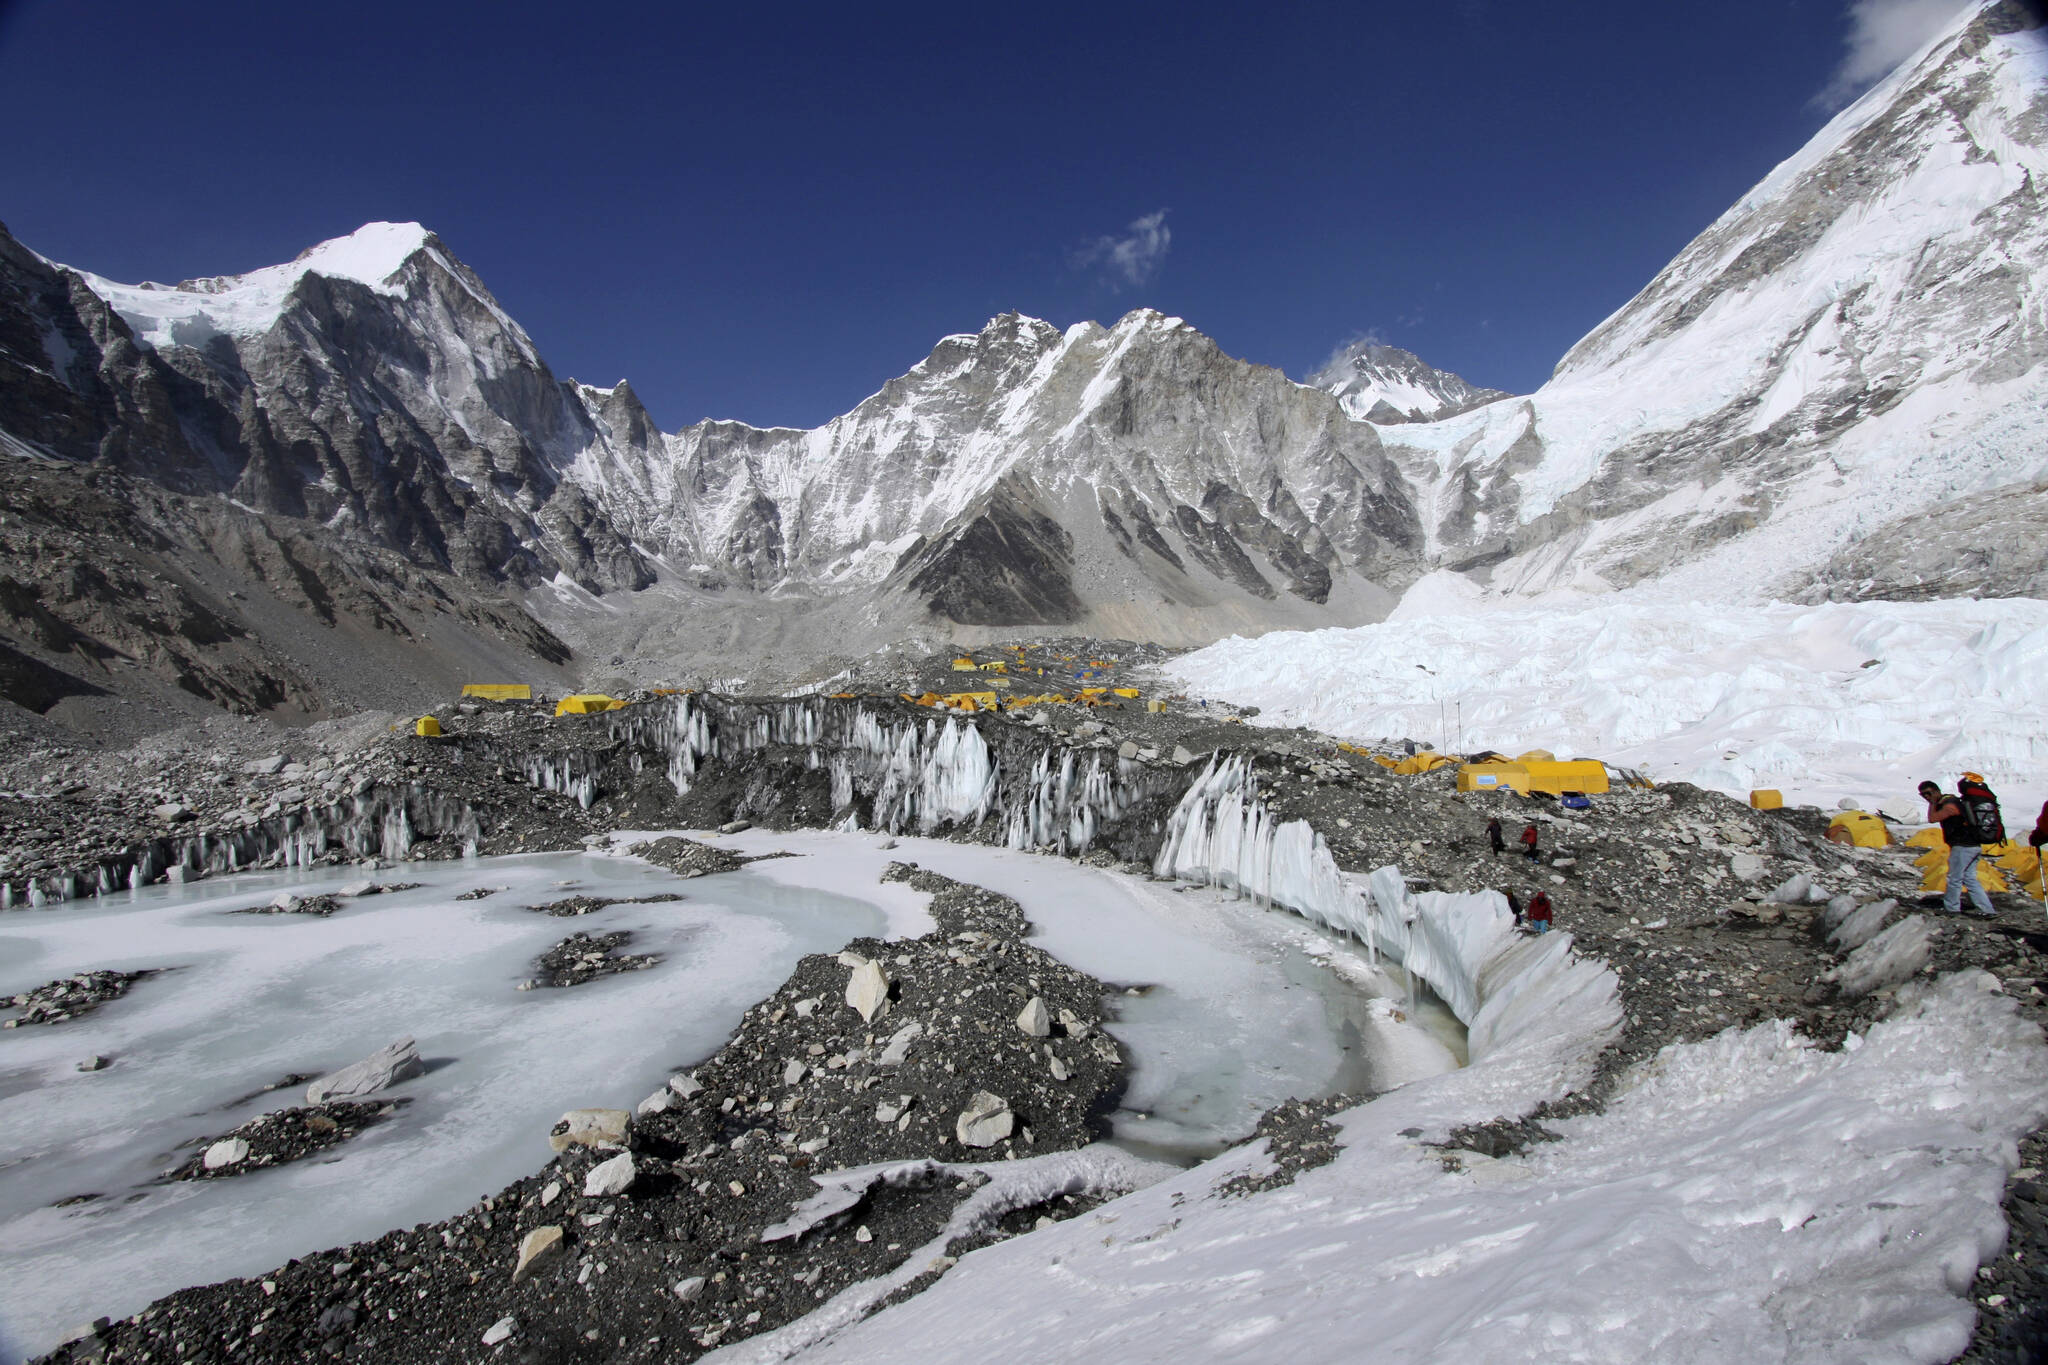 Tents are set up for climbers on the Khumbu Glacier, with Mount Khumbutse, center, and Khumbu Icefall, right, seen in background, at Everest Base Camp in Nepal on April 11, 2015. As glaciers melt and pour massive amounts of water into nearby lakes, 15 million people across the globe live under the threat of a sudden and deadly outburst flood, a new study finds. (AP Photo/Tashi Sherpa)